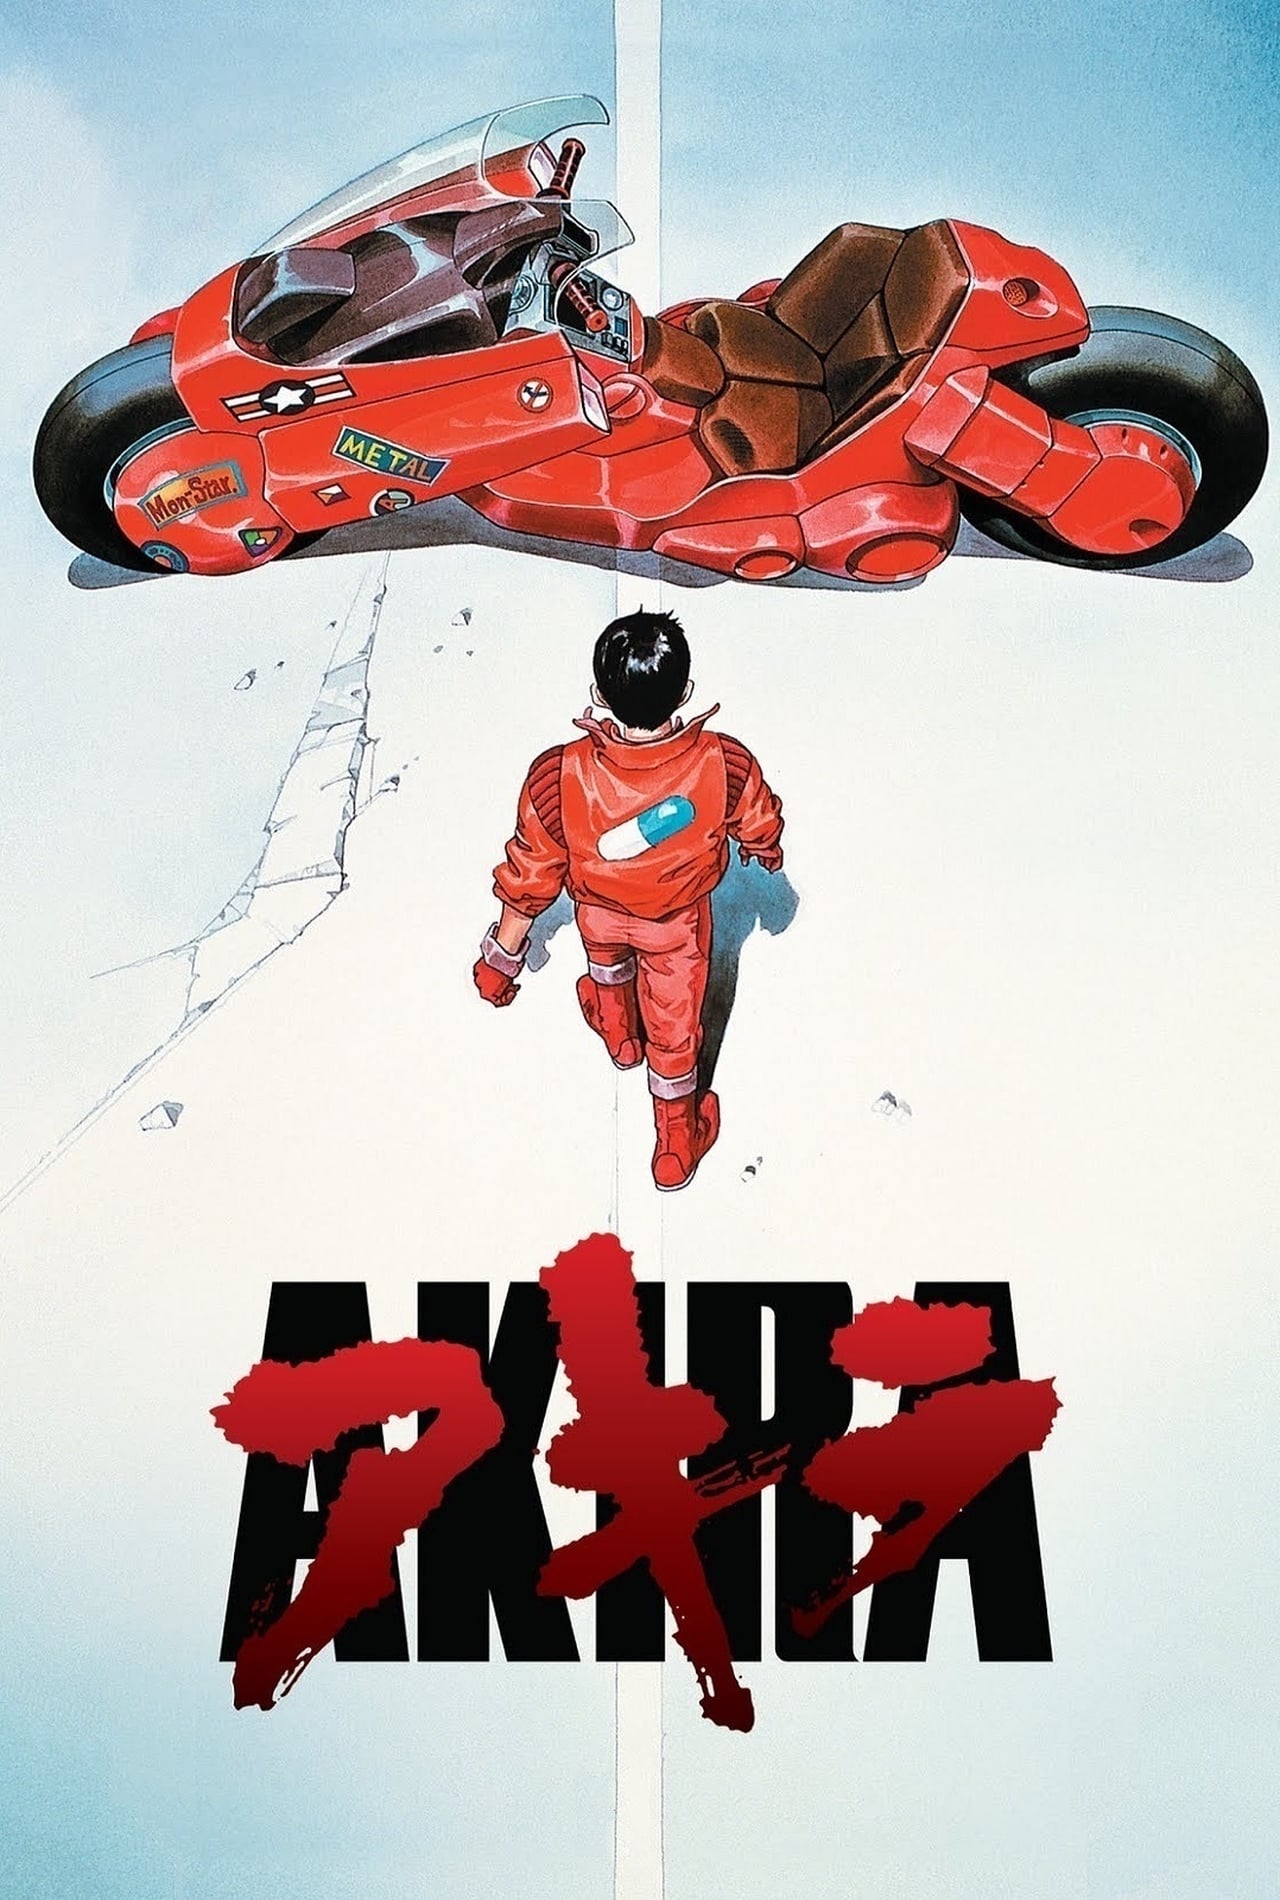 Poster of the movie